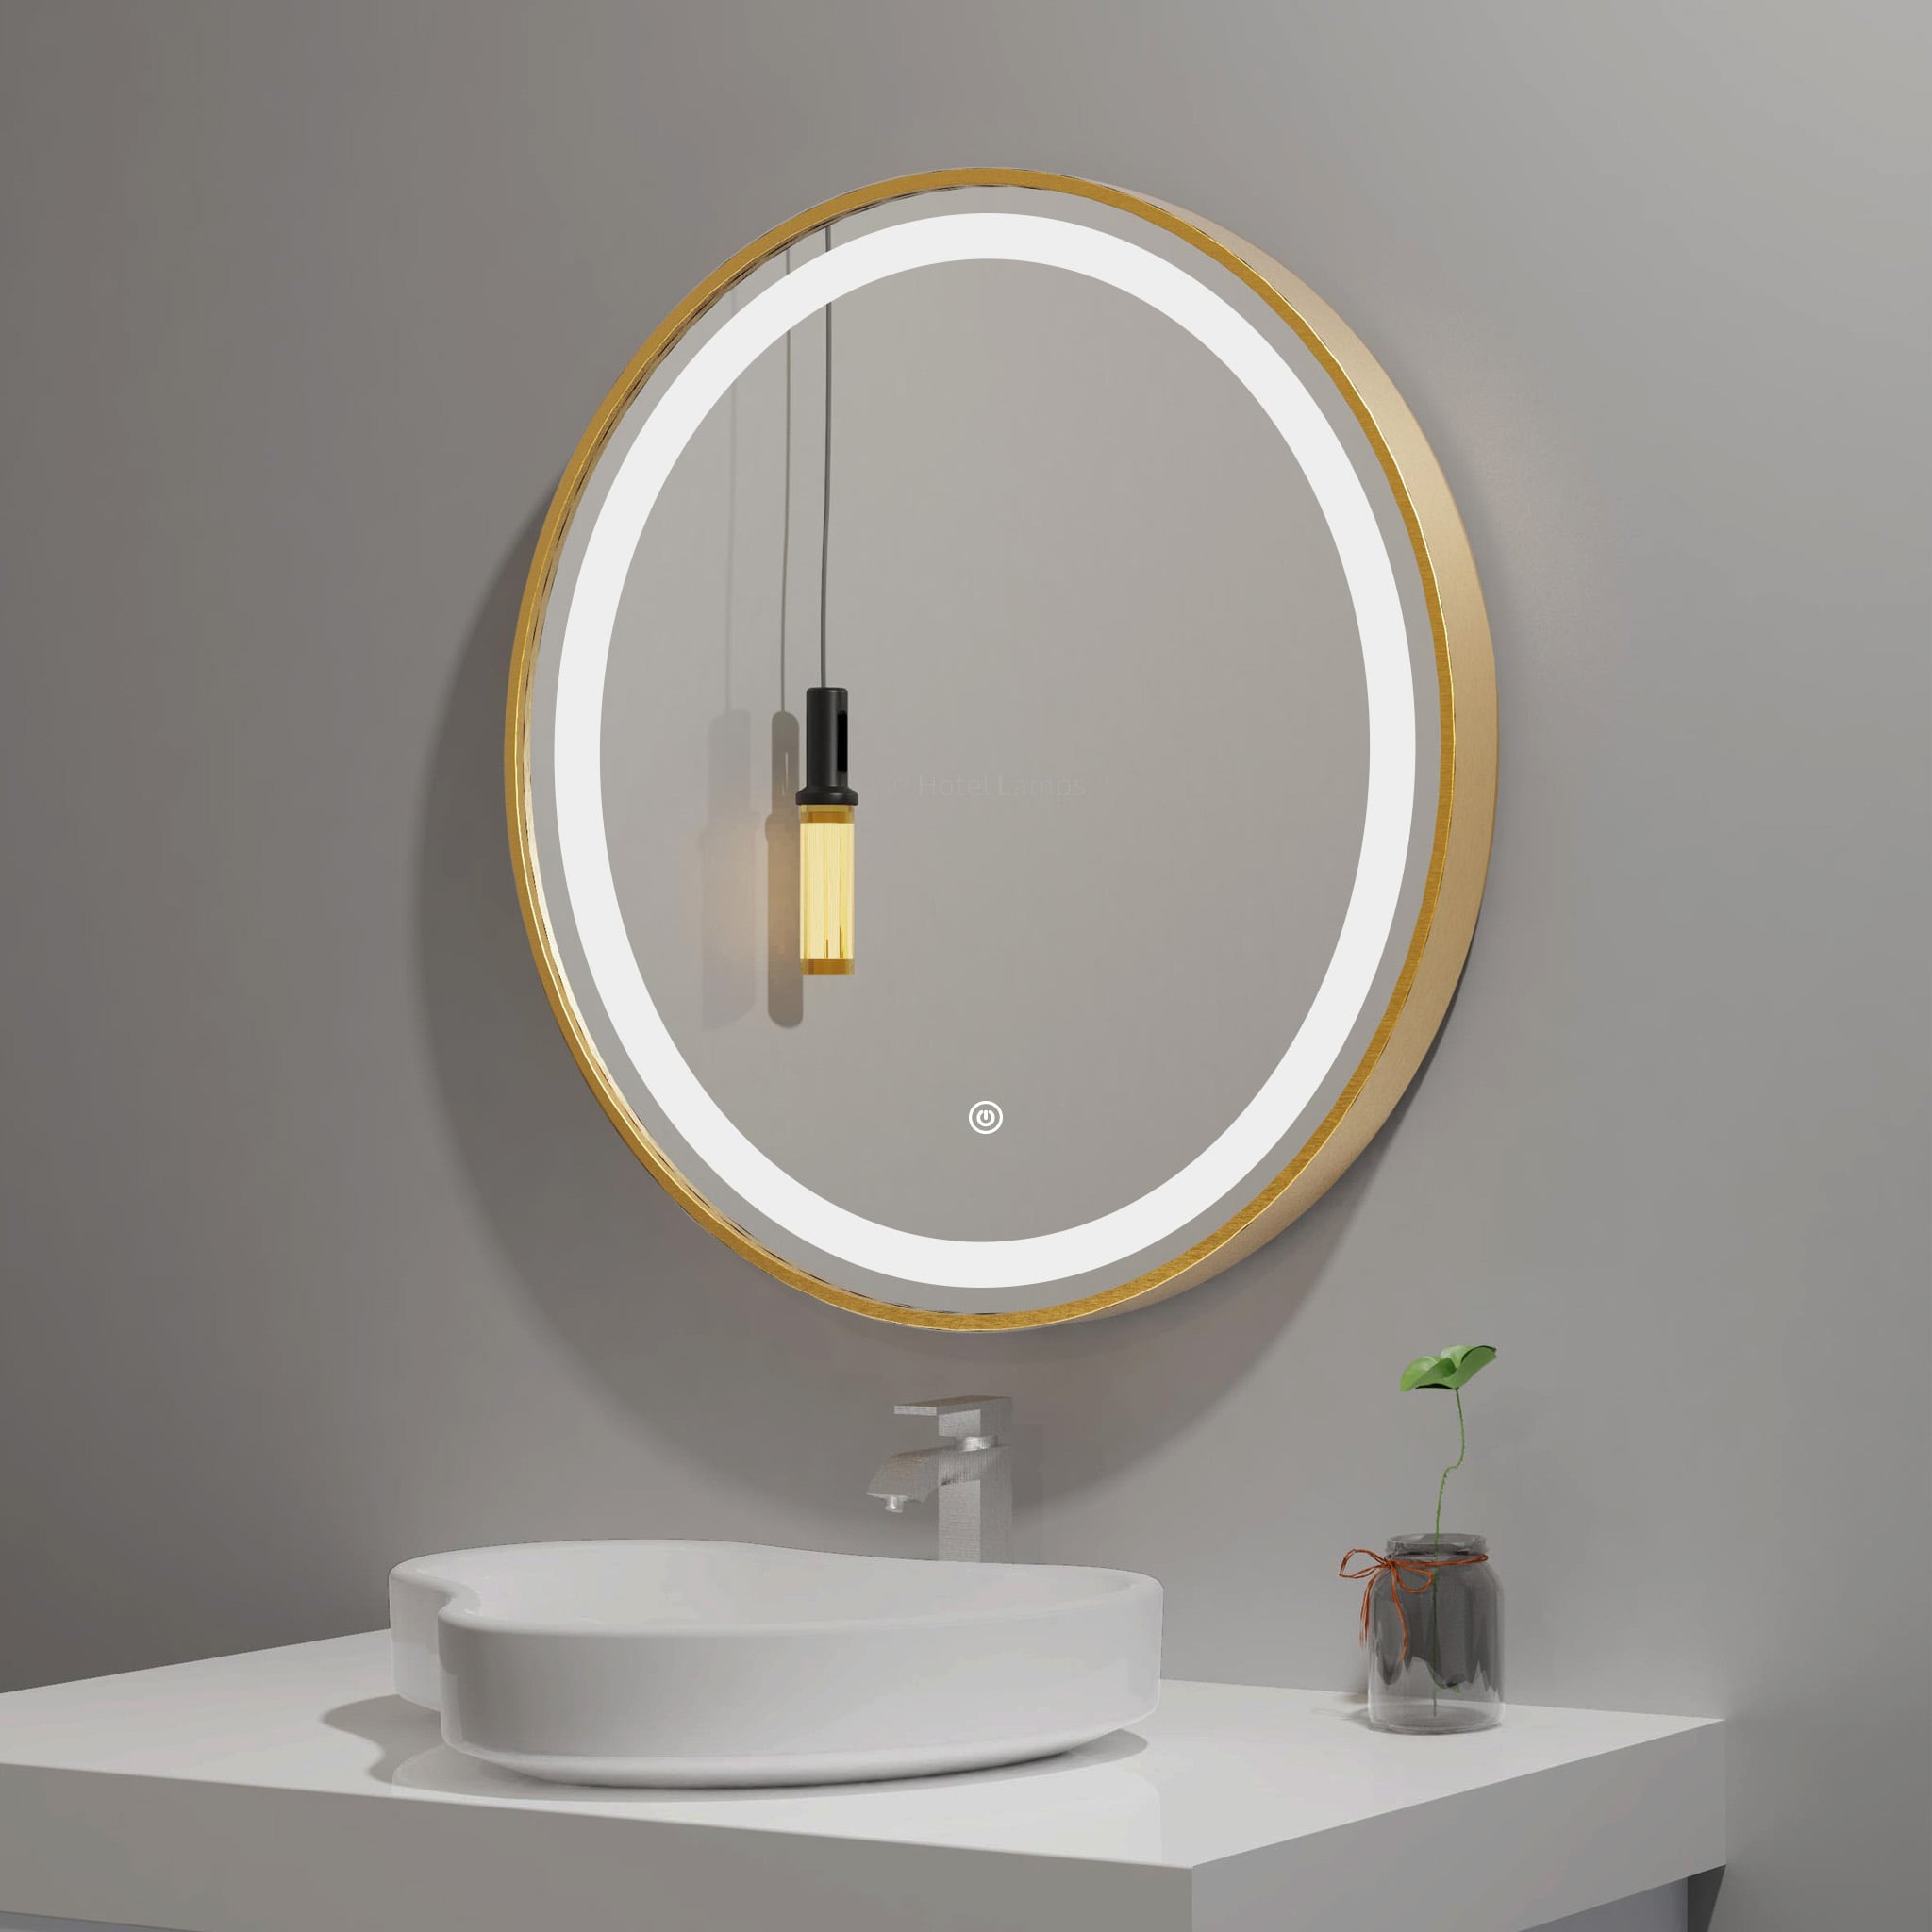 LED Mirror Single Touch Switch Available in 2 Sizes